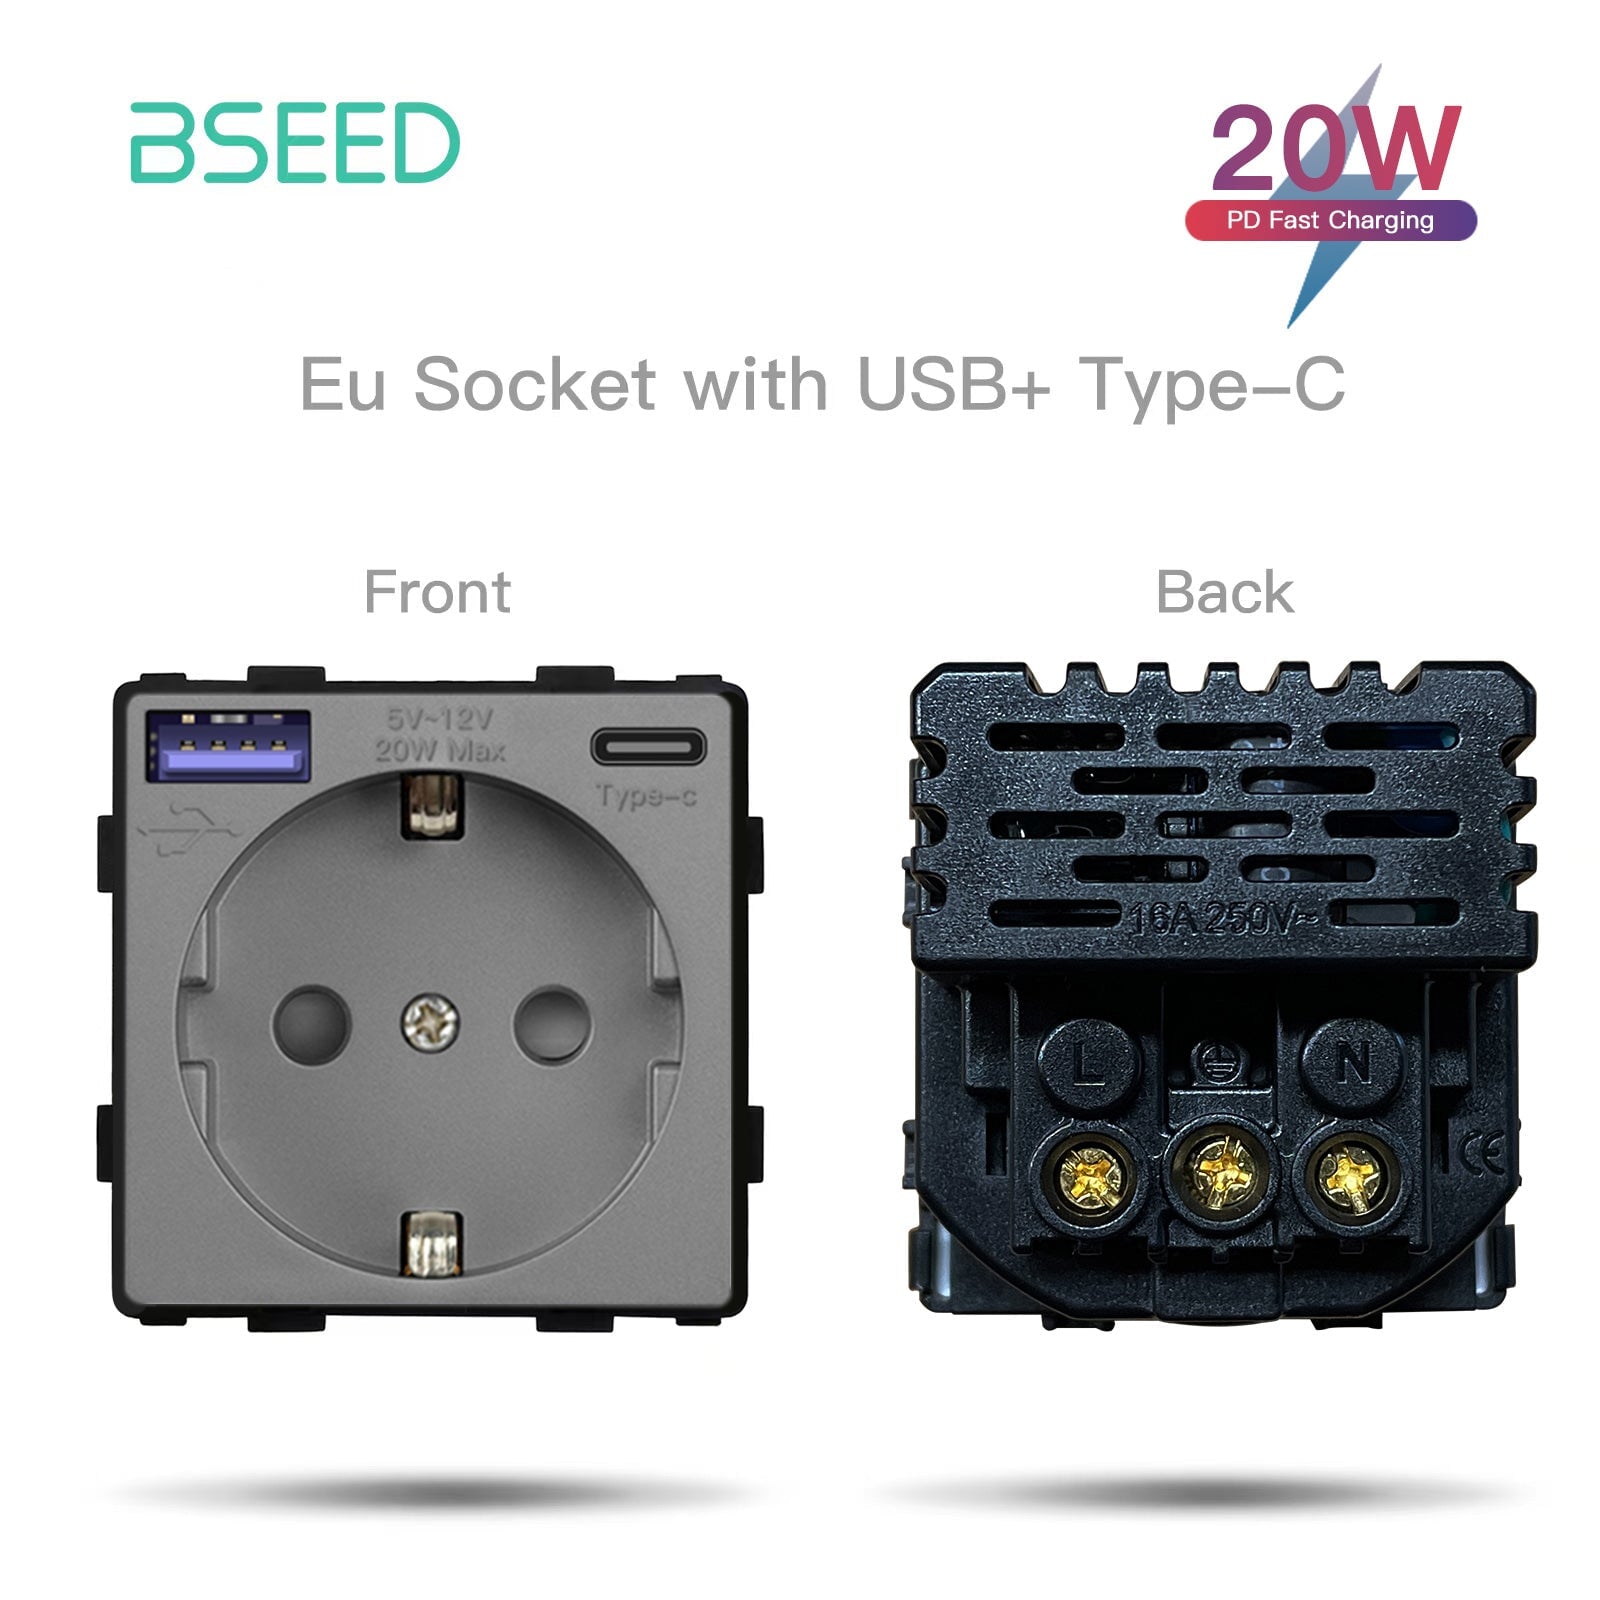 BSEED EU Type-C Interface Outlet Wall Socket 16A 20W USB-C Charge Power Outlets & Sockets Bseedswitch Grey 20W 